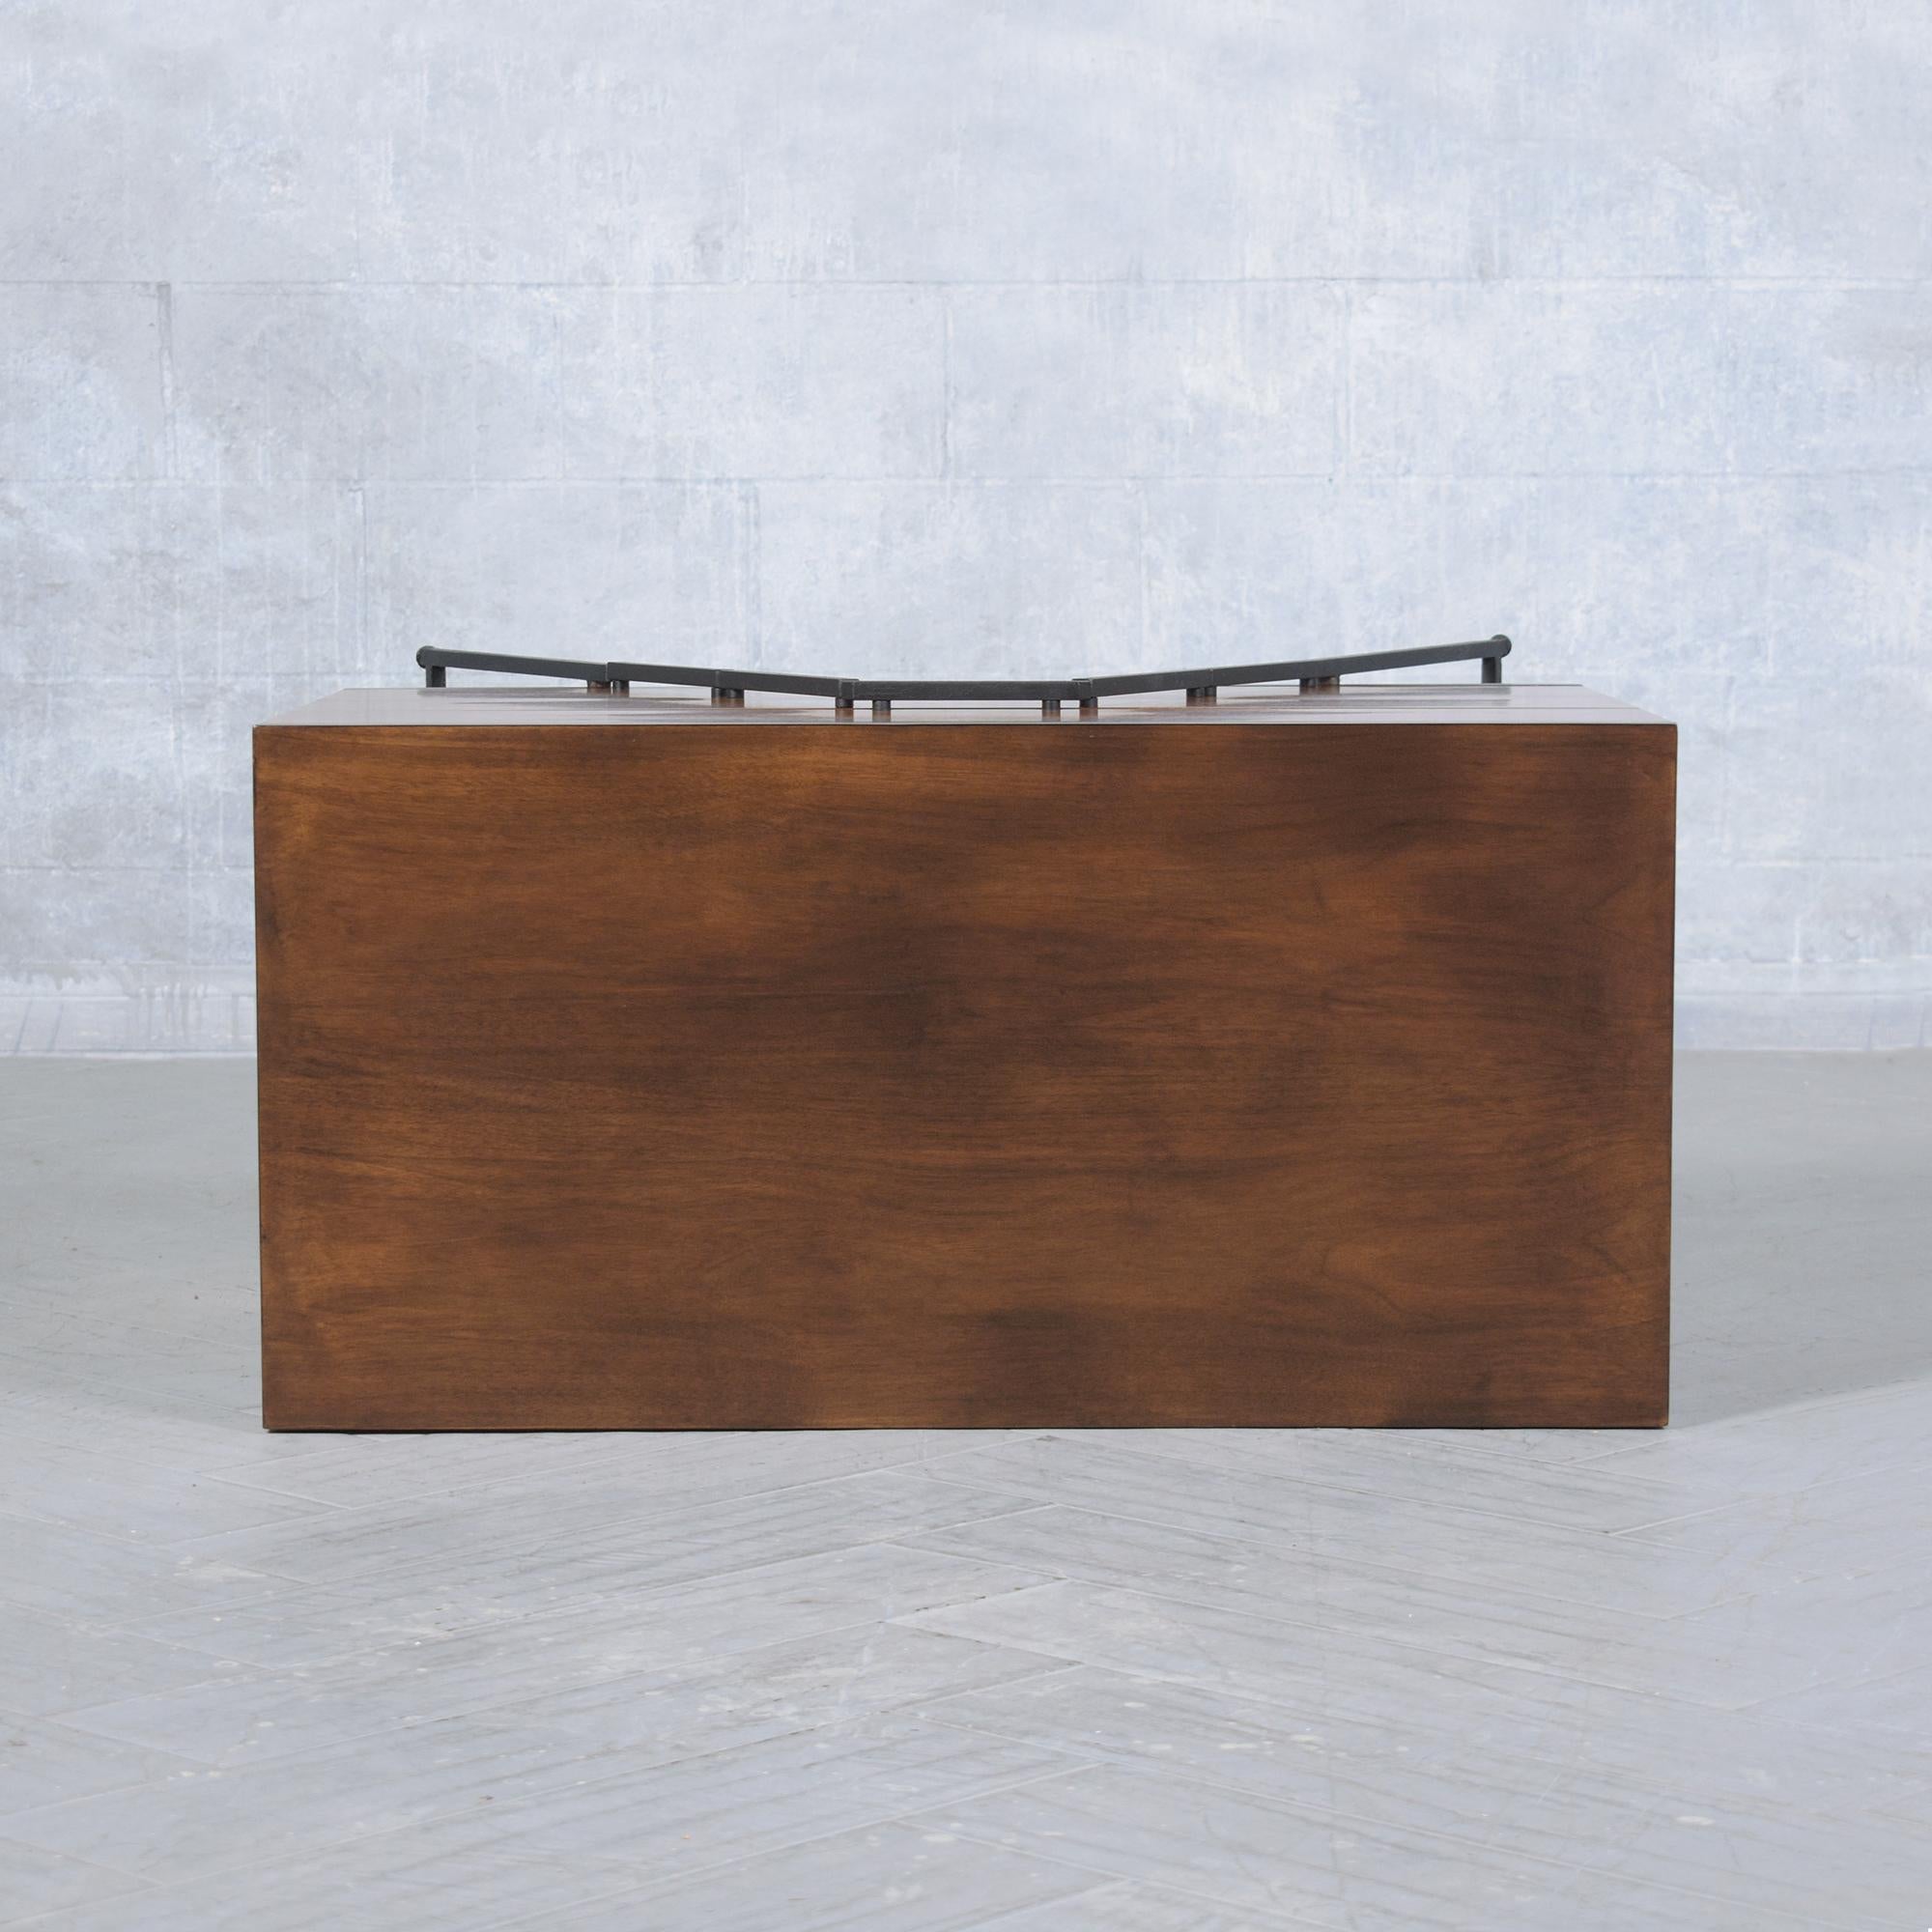 Restored 1960s Mid-Century Modern Wood Chest with Wrought Iron Handles For Sale 5